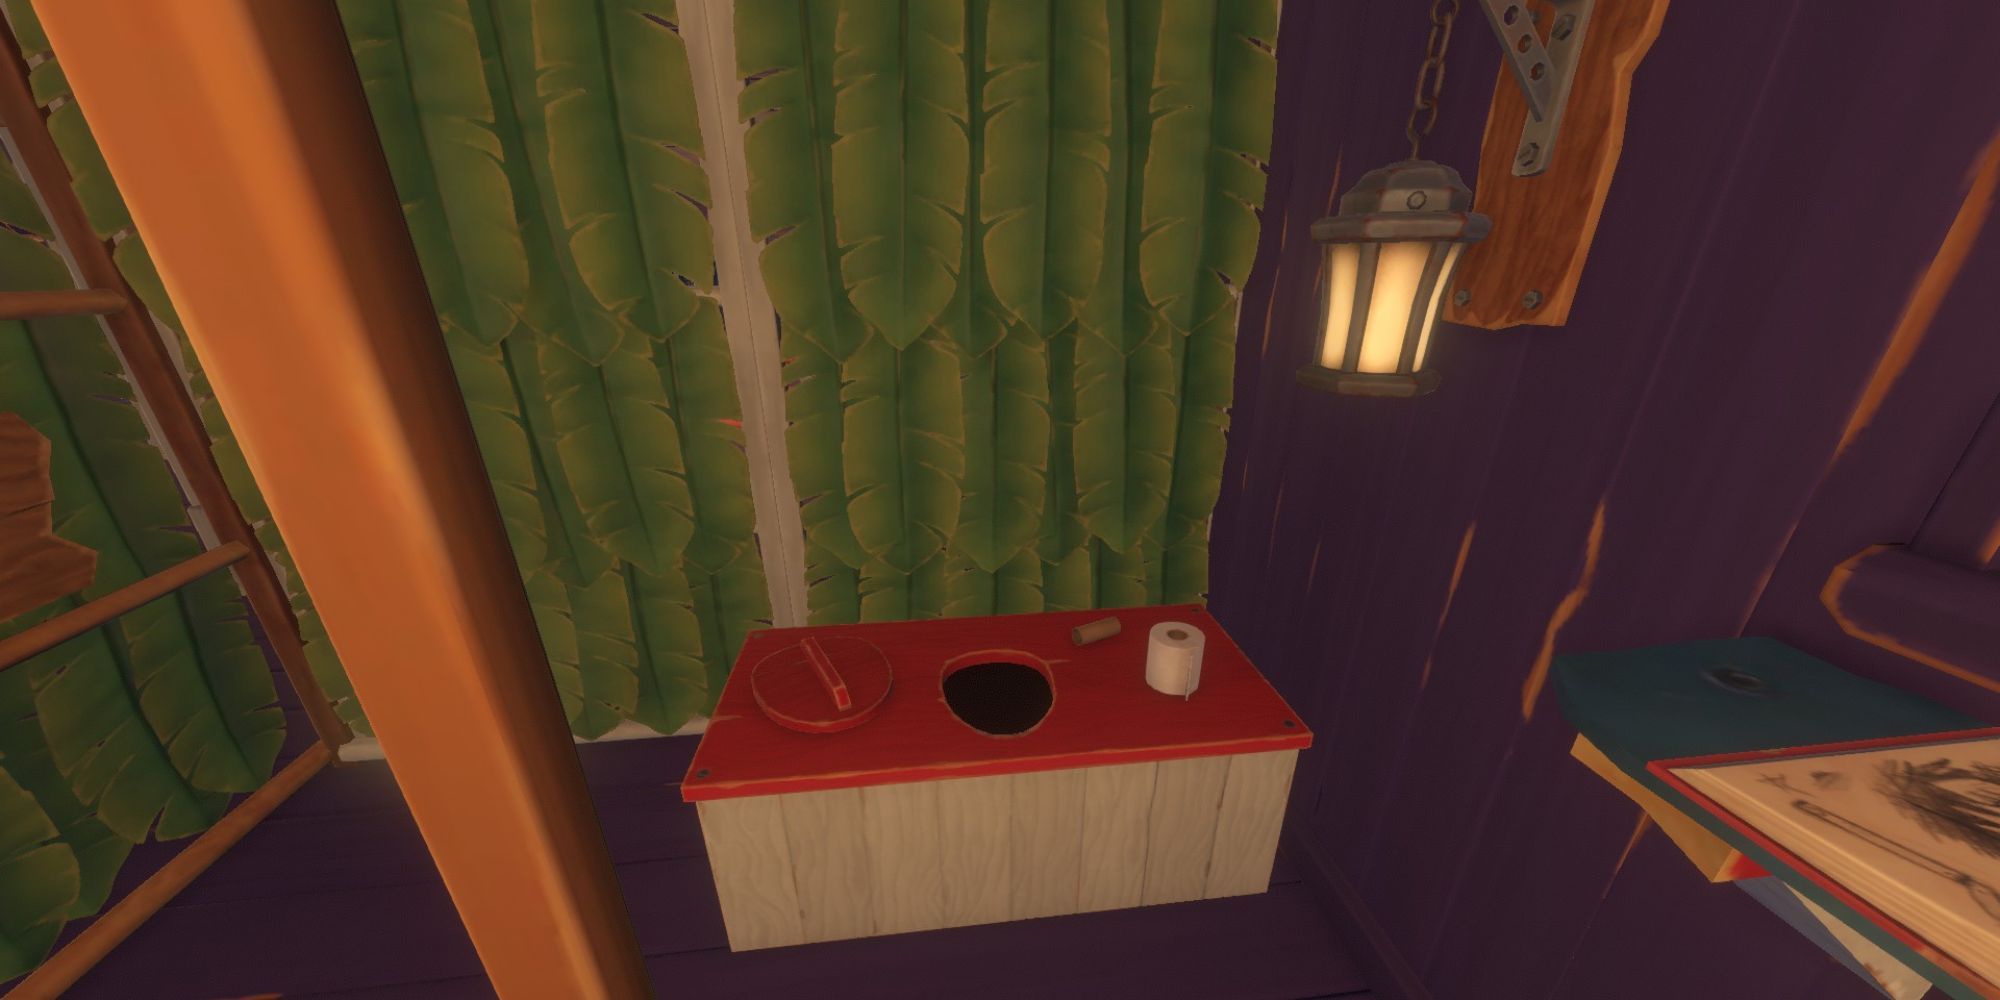 A painted wooden toilet in a corner of a raft's interiors